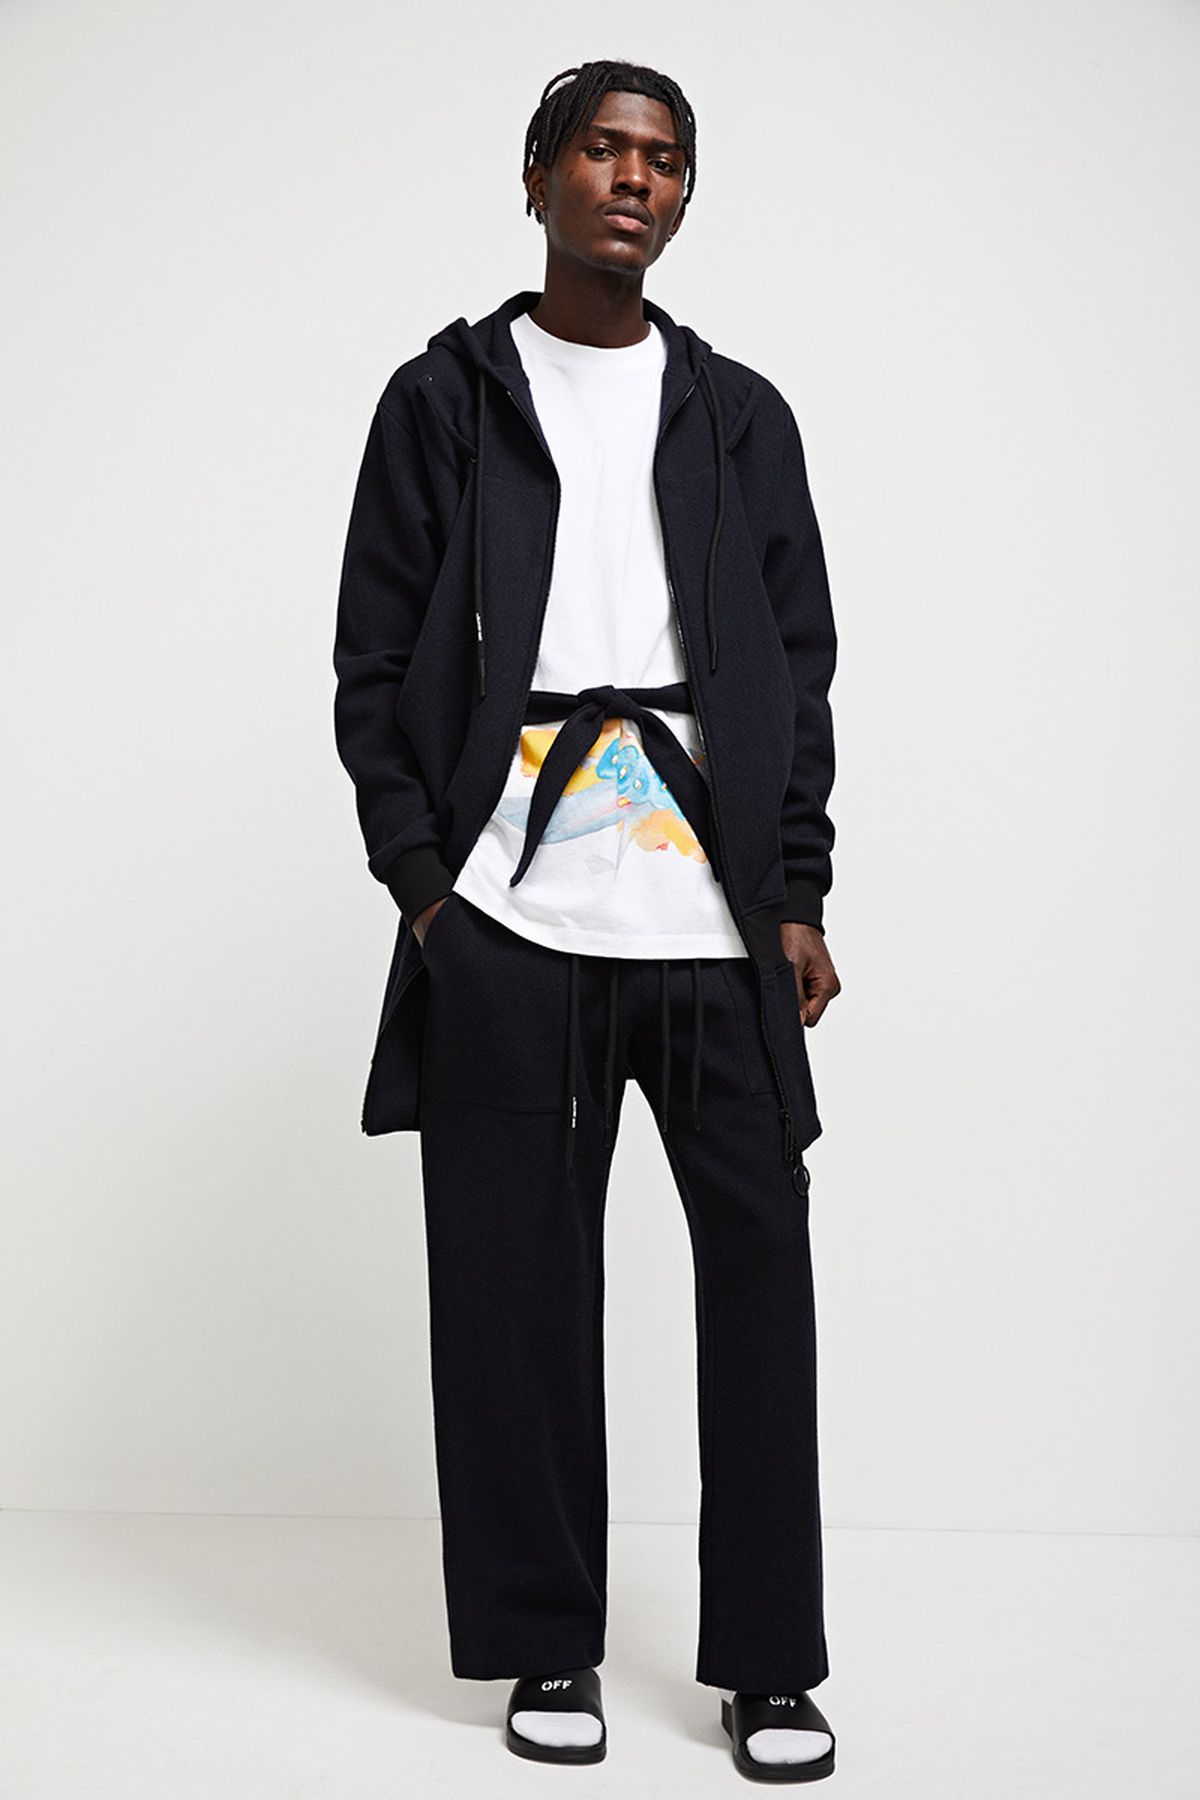 Nordstrom Introduces Black_Space to Amplify Black Designers